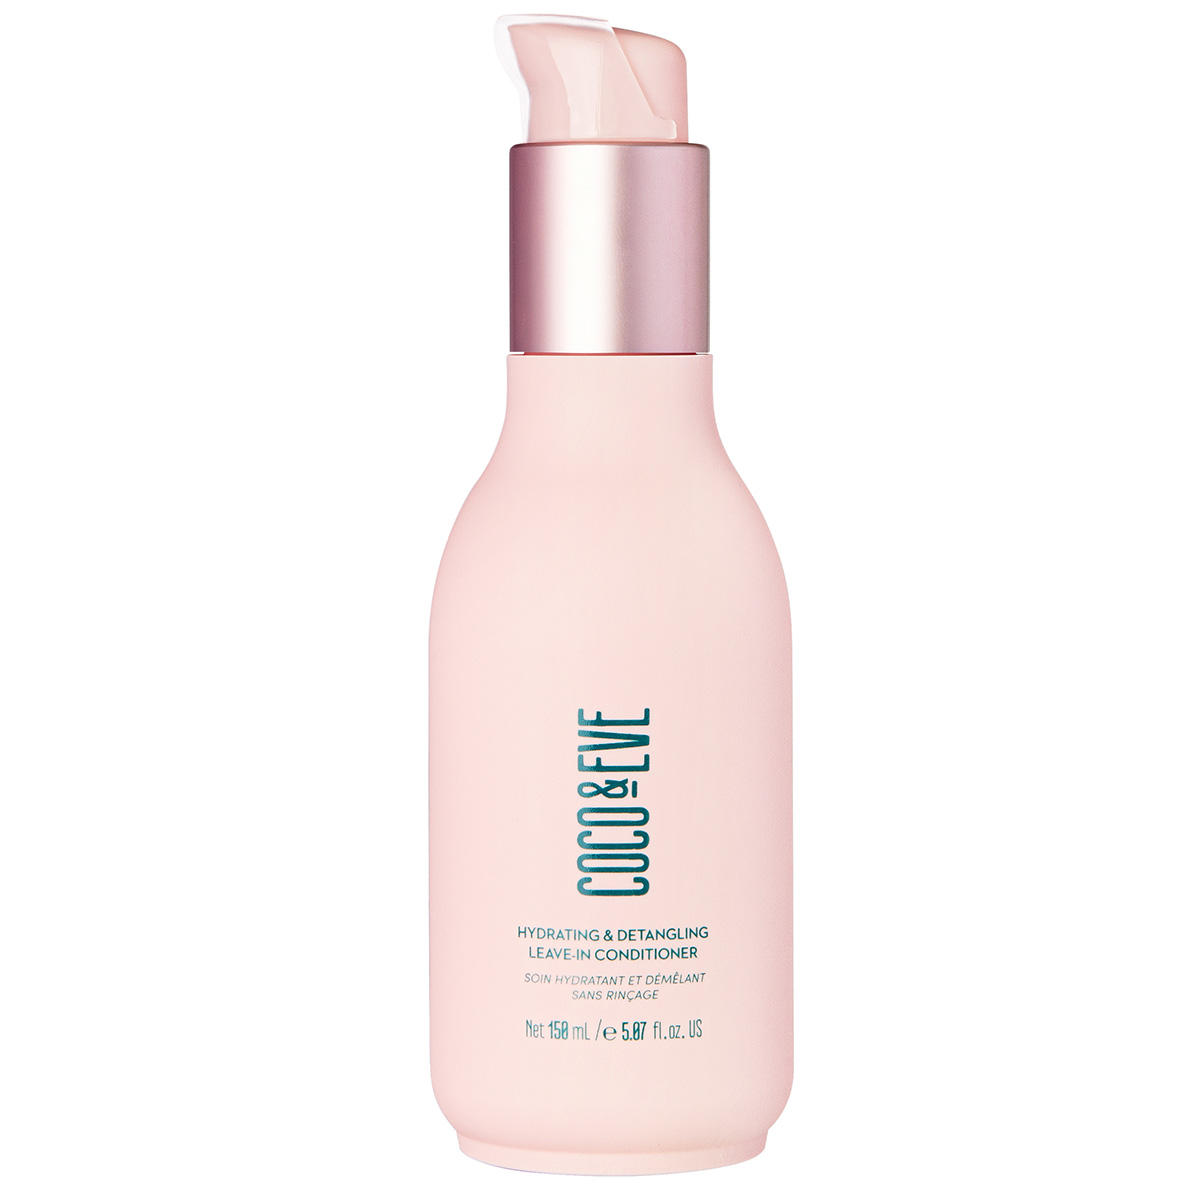 coco & eve like a virgin hydrating & detangling leave-in conditioner 150 ml